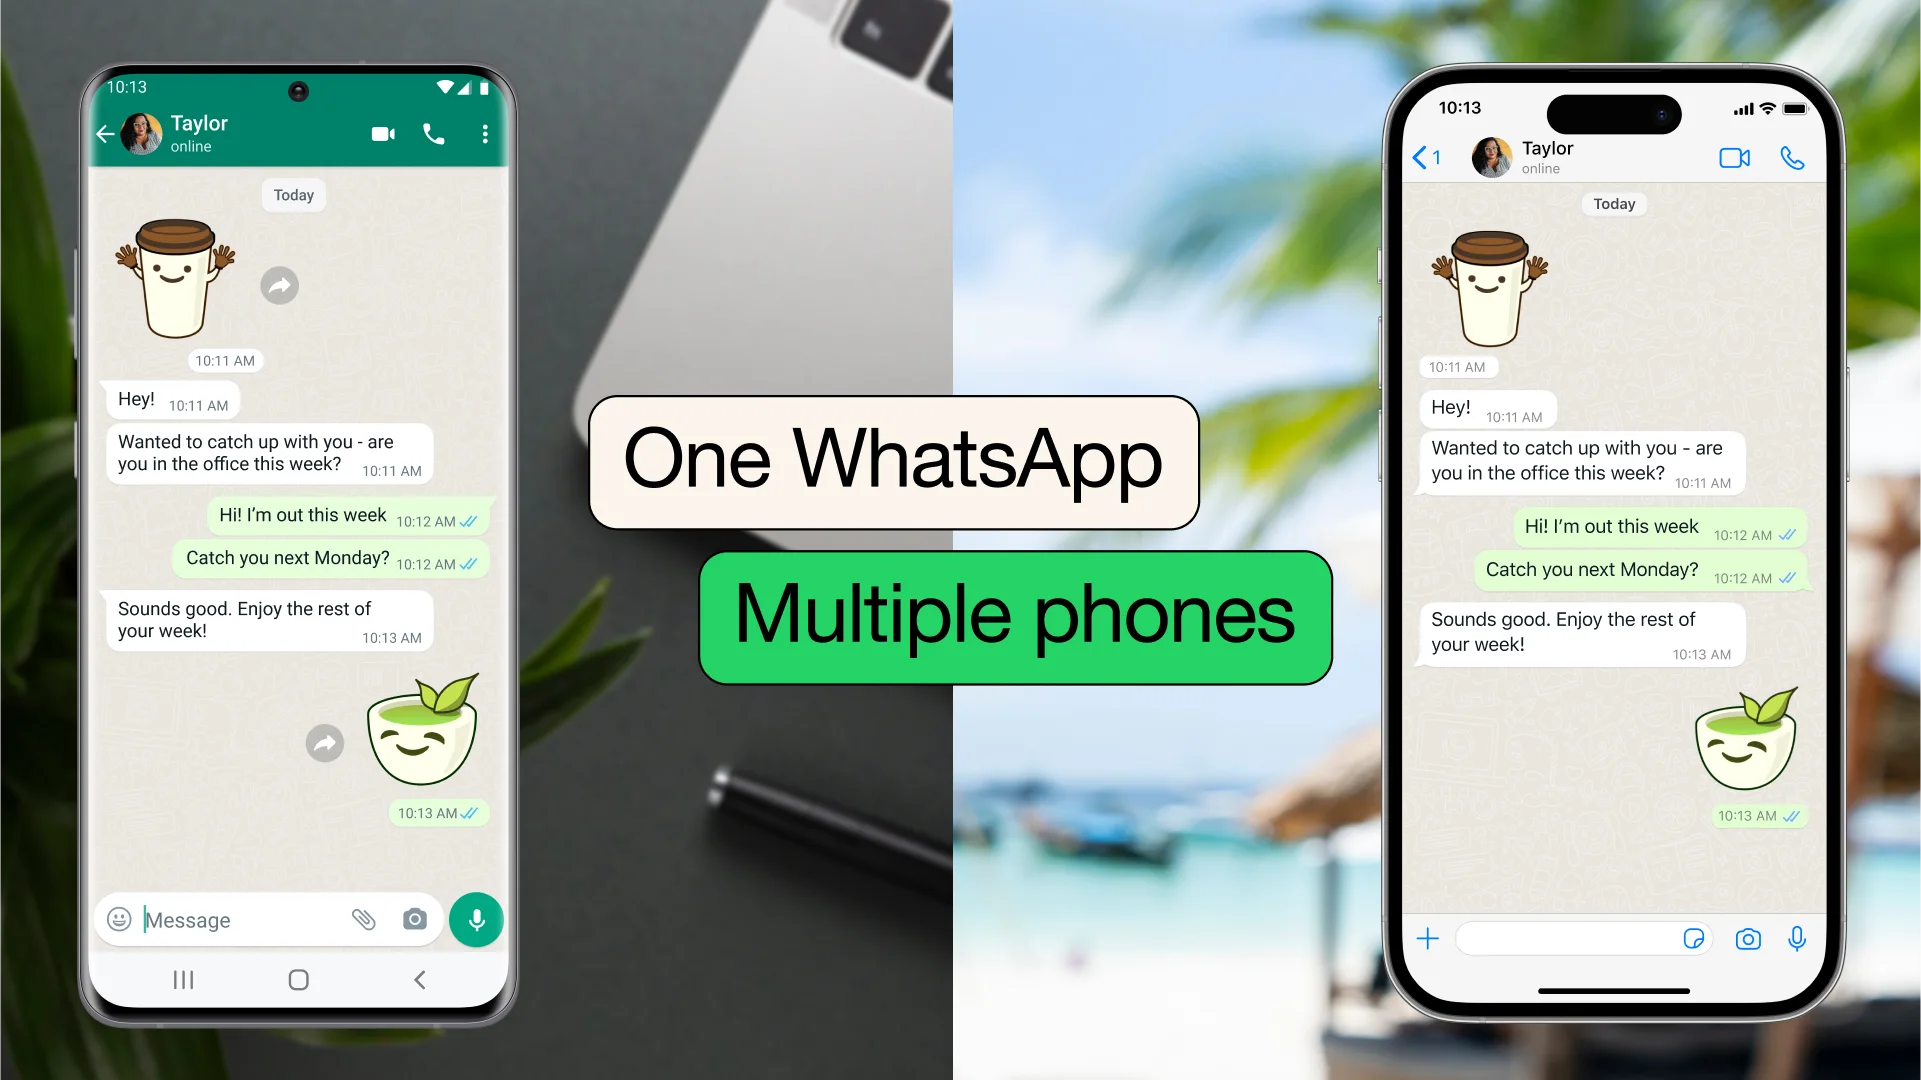 The new WhatsApp feature allows the same account on multiple devices